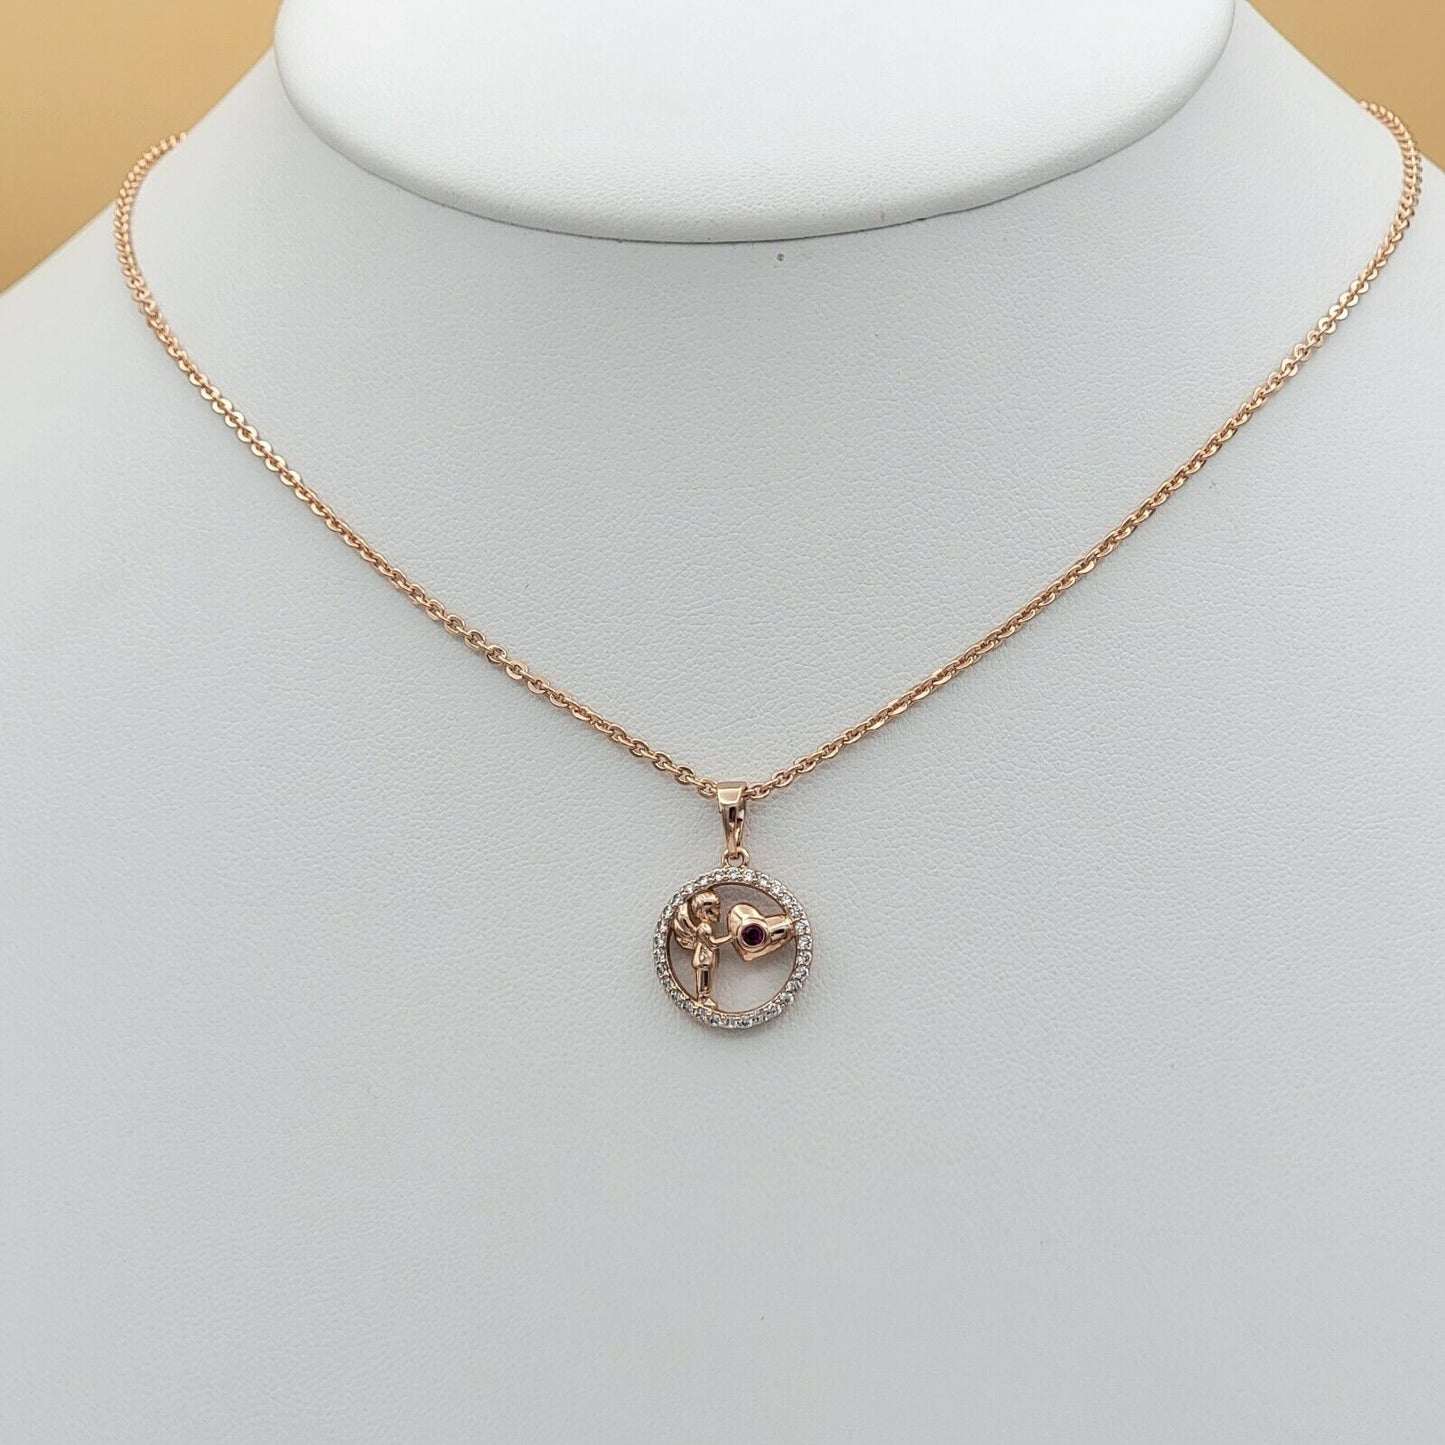 Necklaces - Rose Gold Plated. My Angel My Heart - Pendant & Chain.